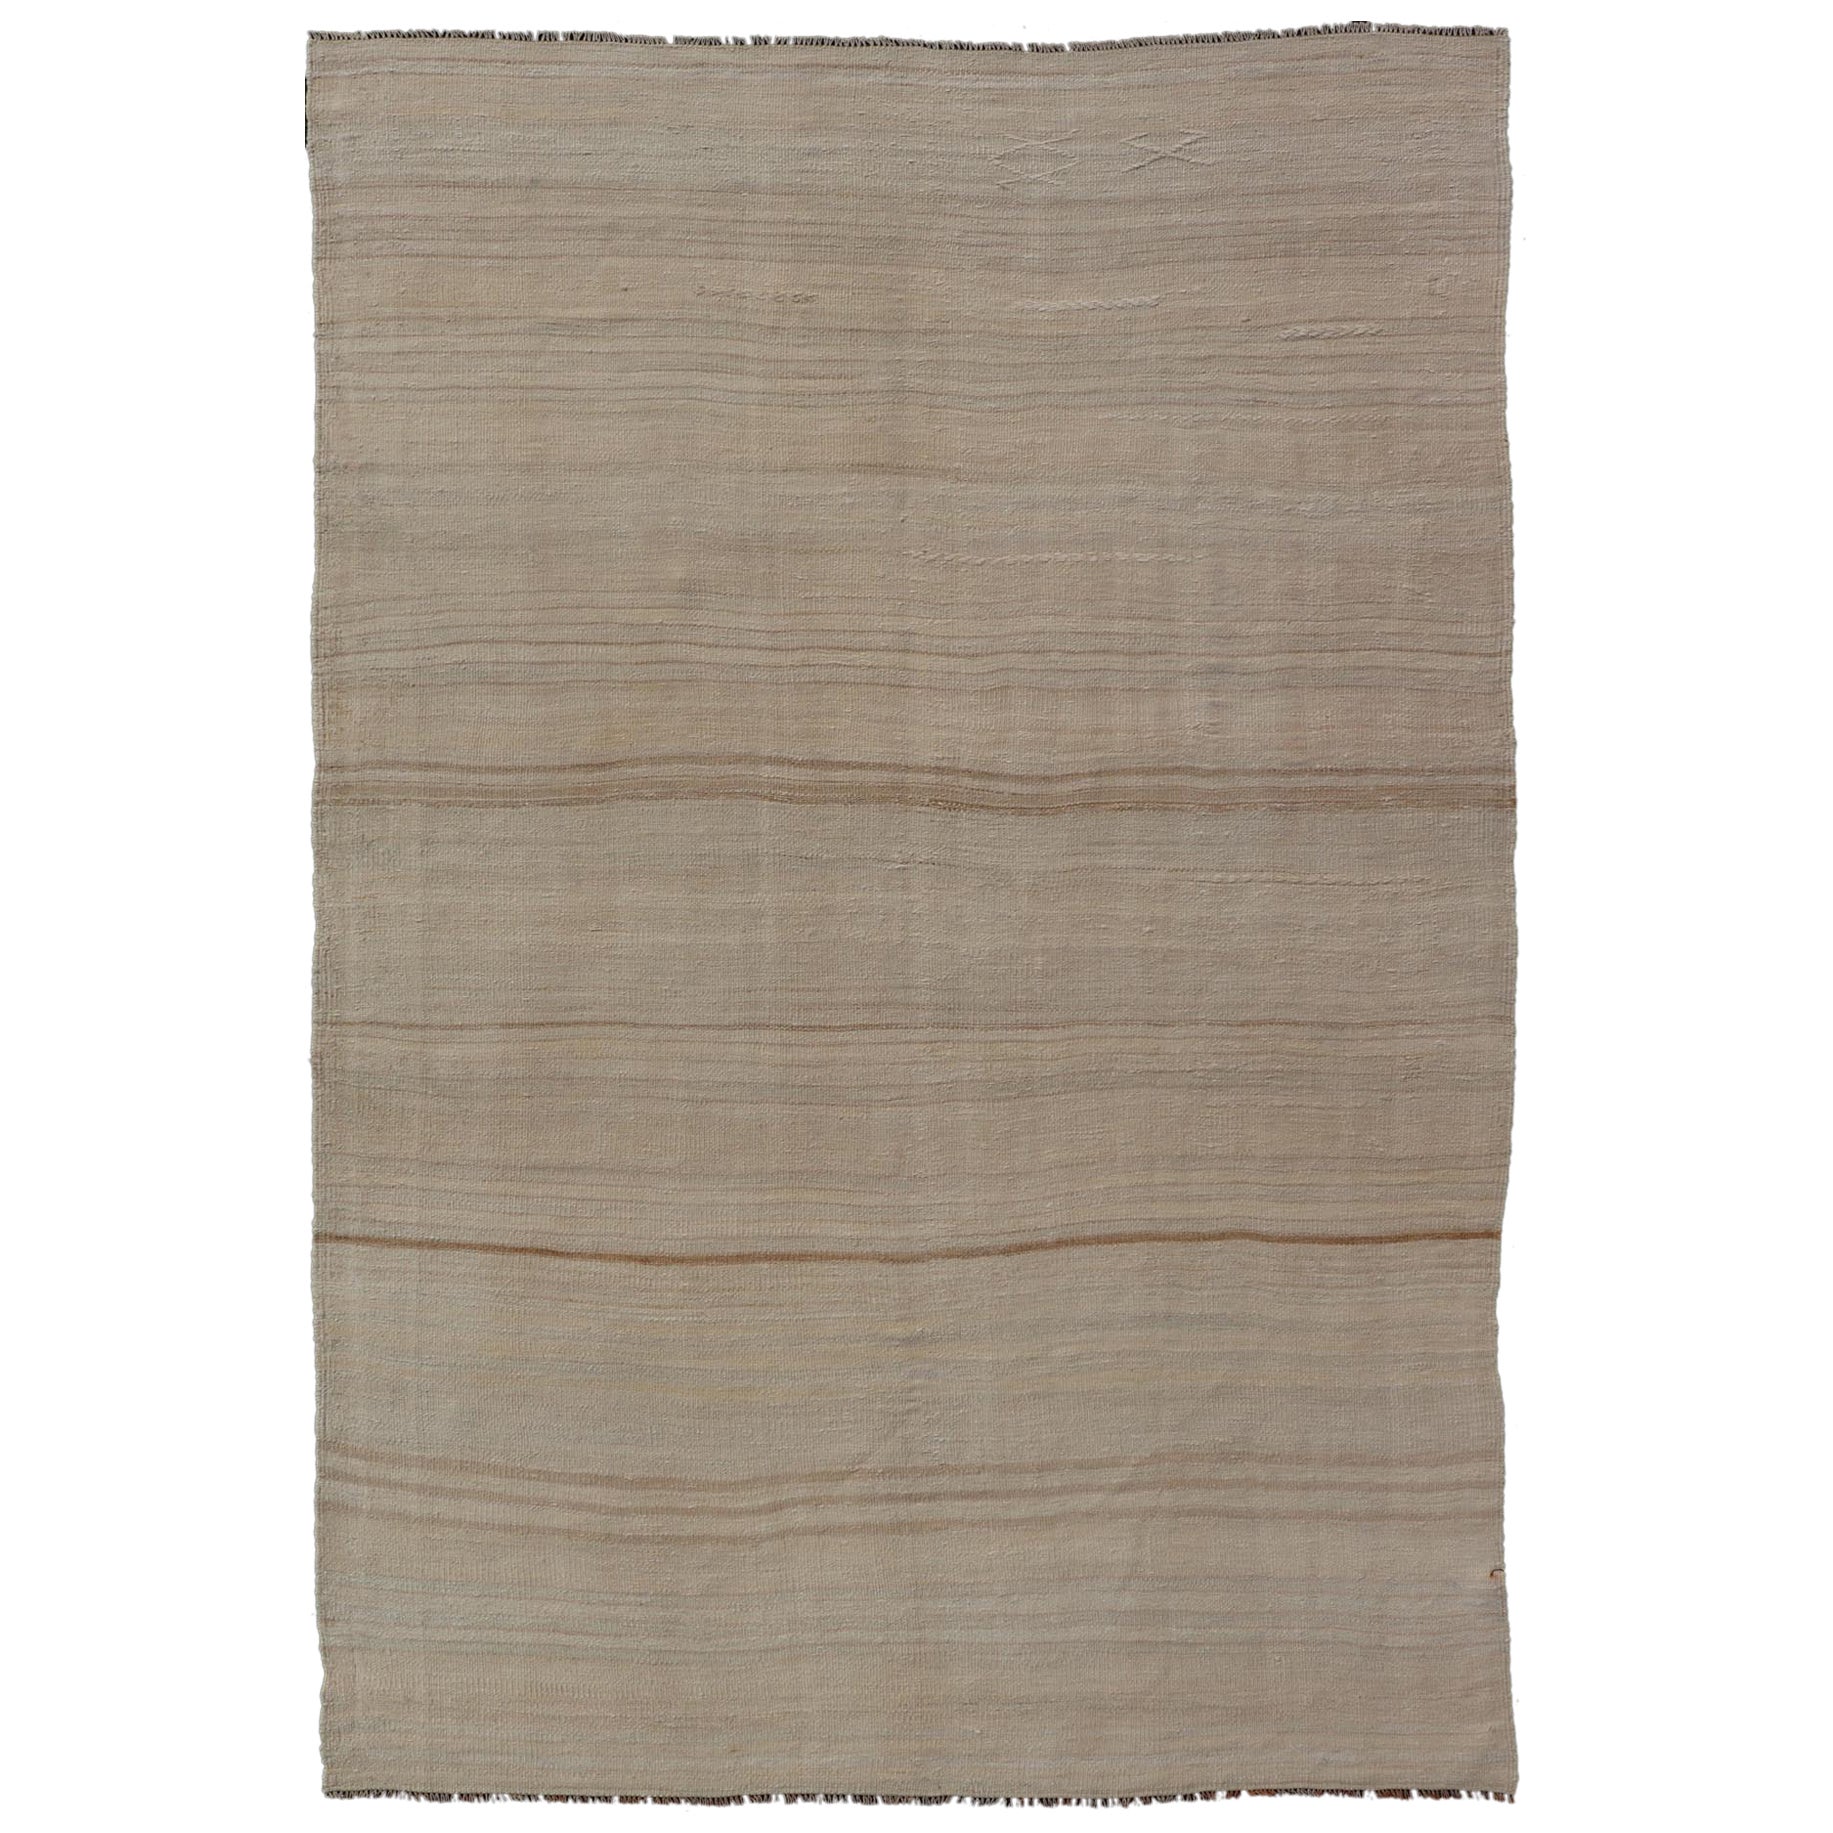 Turkish Hand Woven Vintage Kilim Rug with in Tan, Taupe, Brown, and Earth Tones